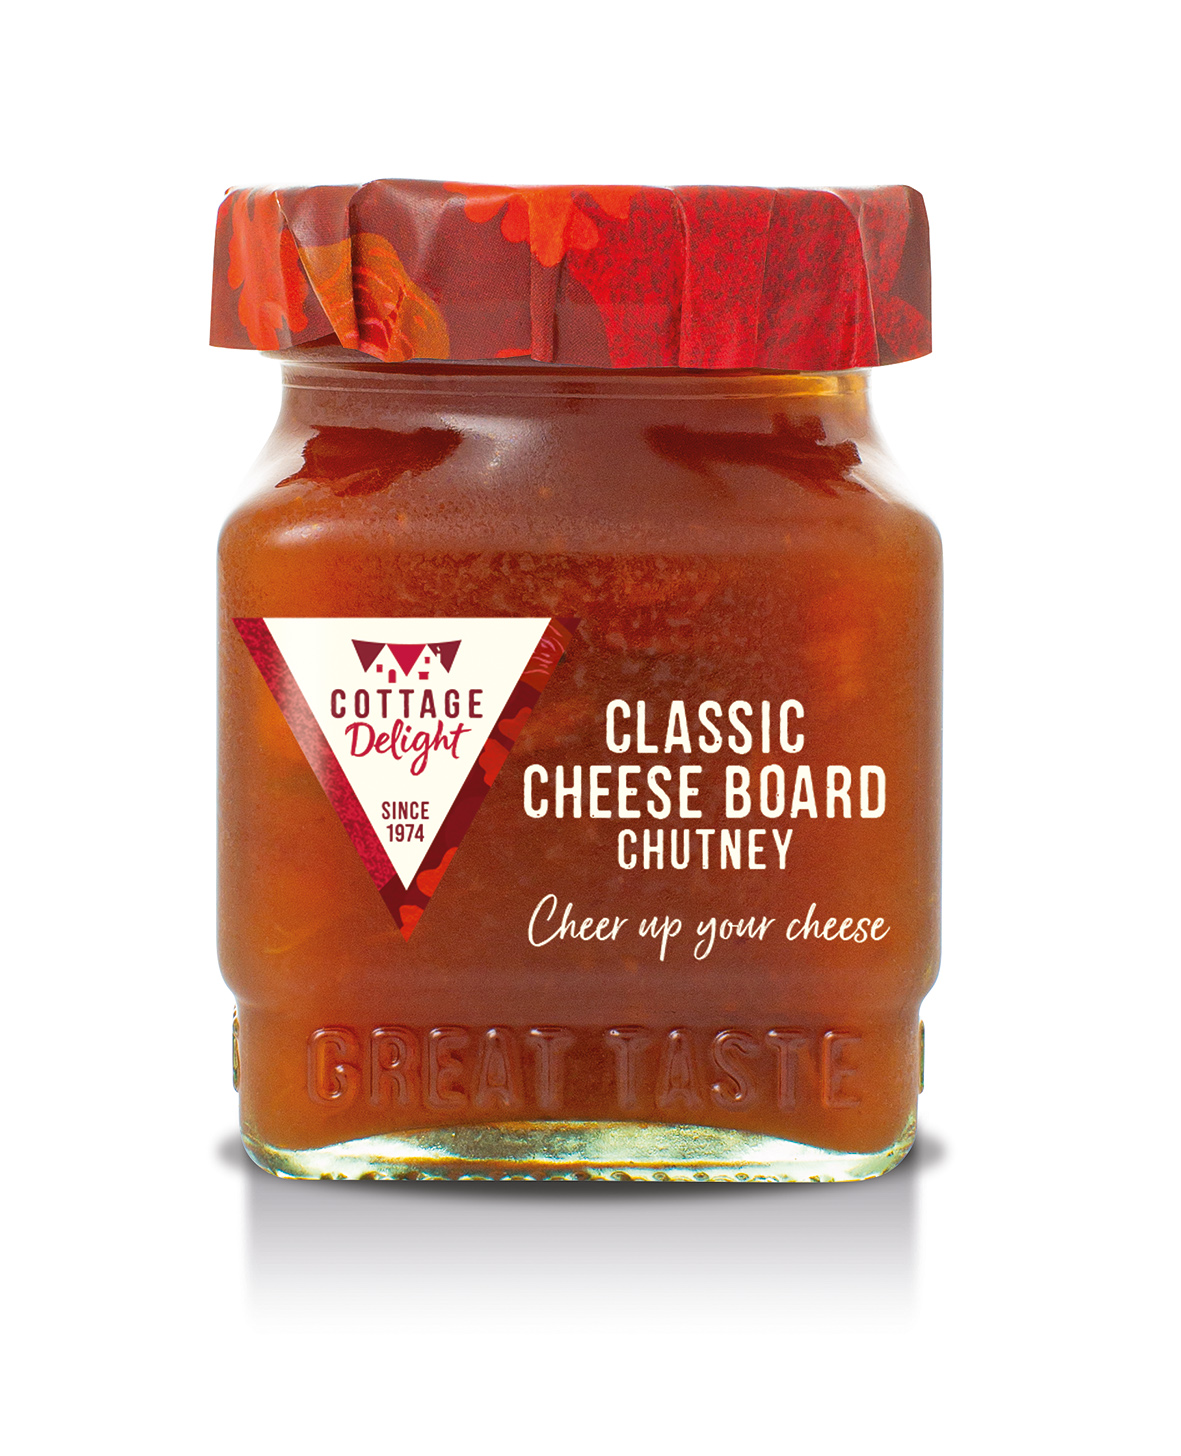 COTTAGE DELIGHT Classic Cheese Board Chutney